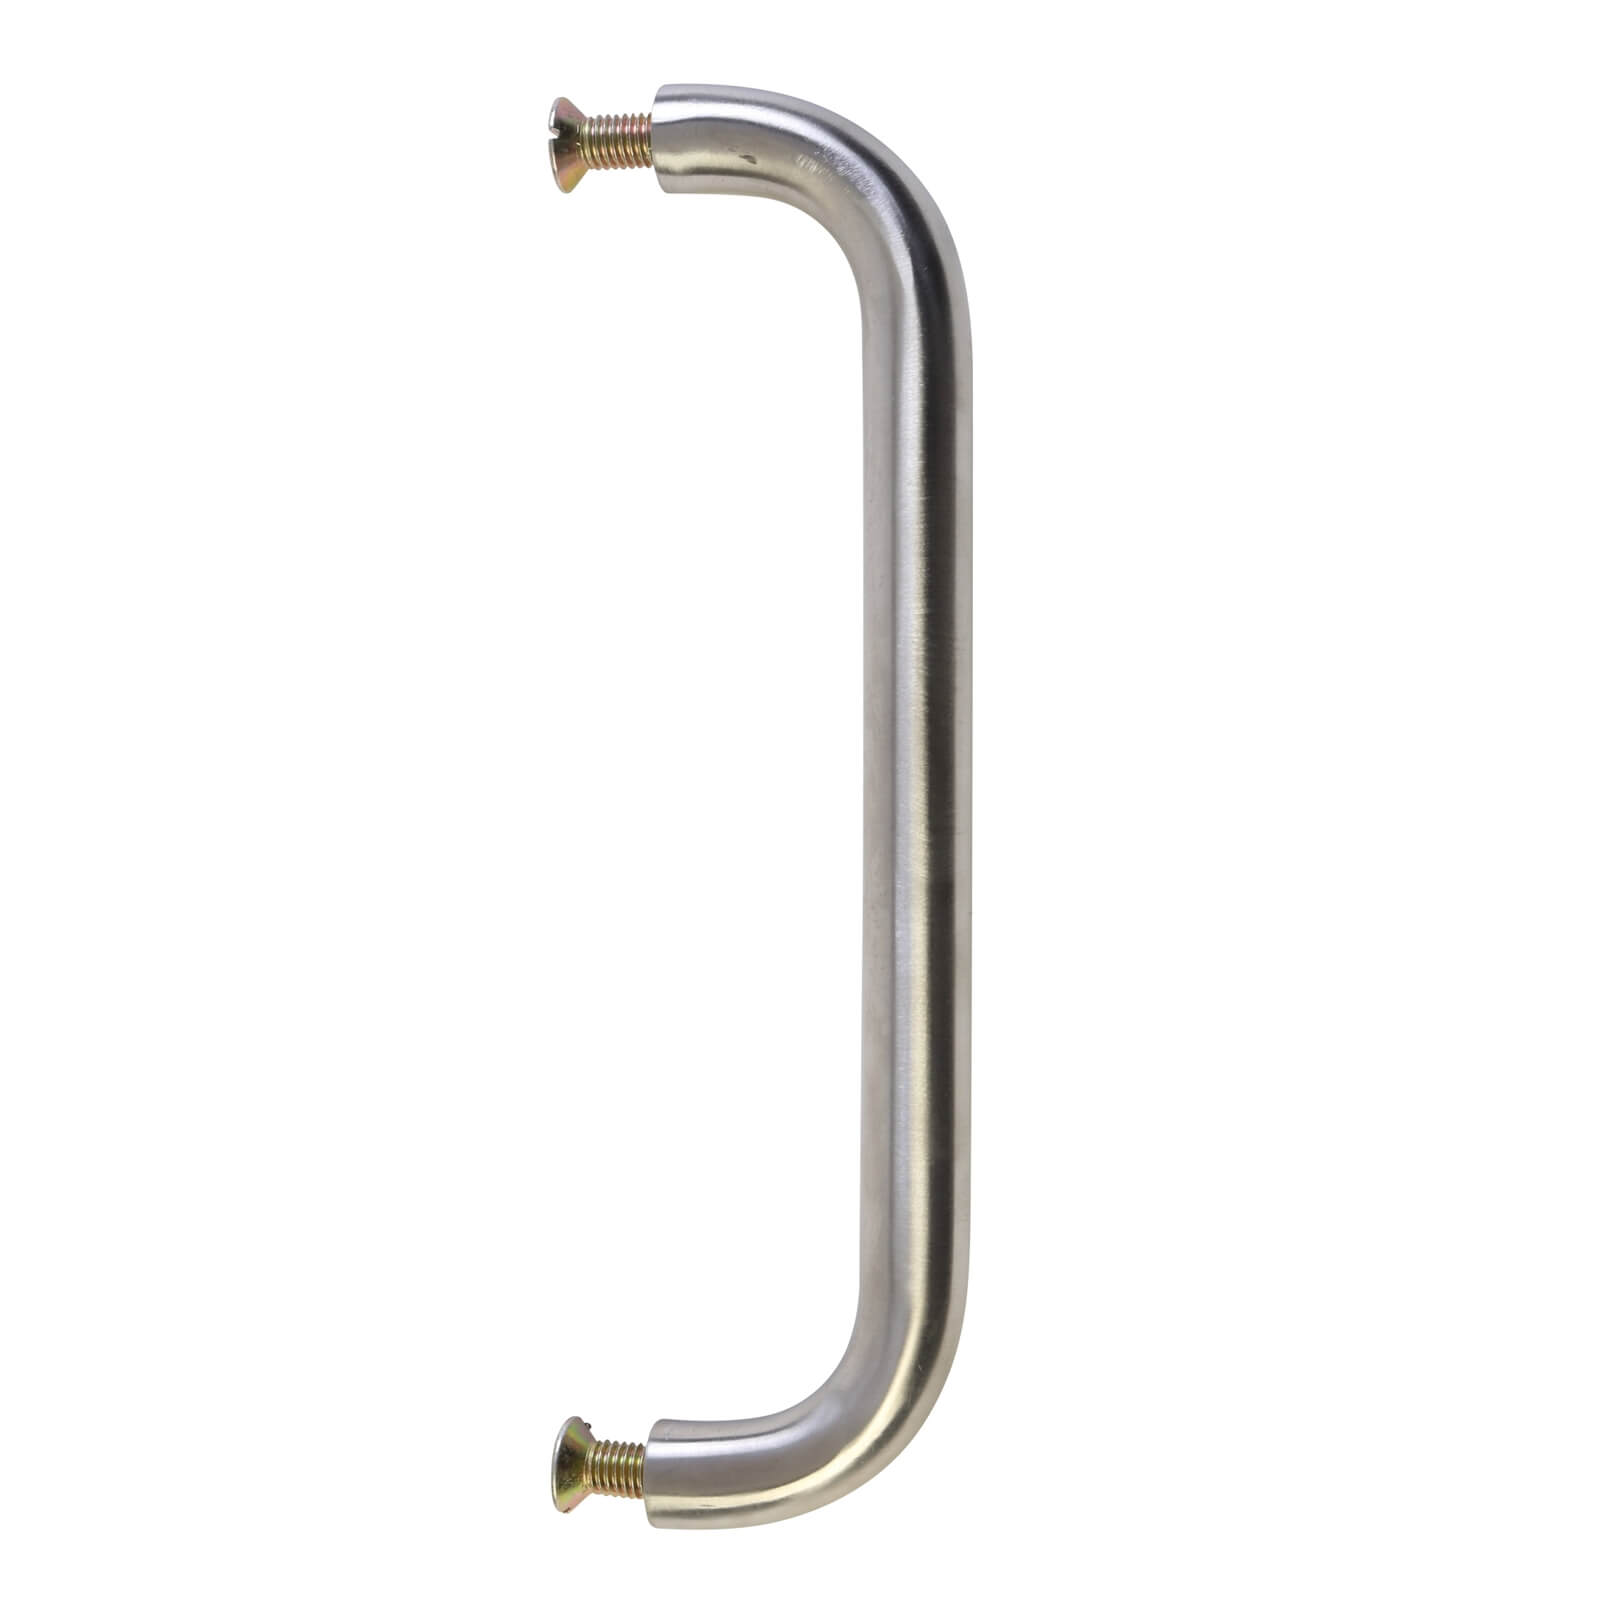 Photo of Pull Handle - Stainless Steel - 230mm